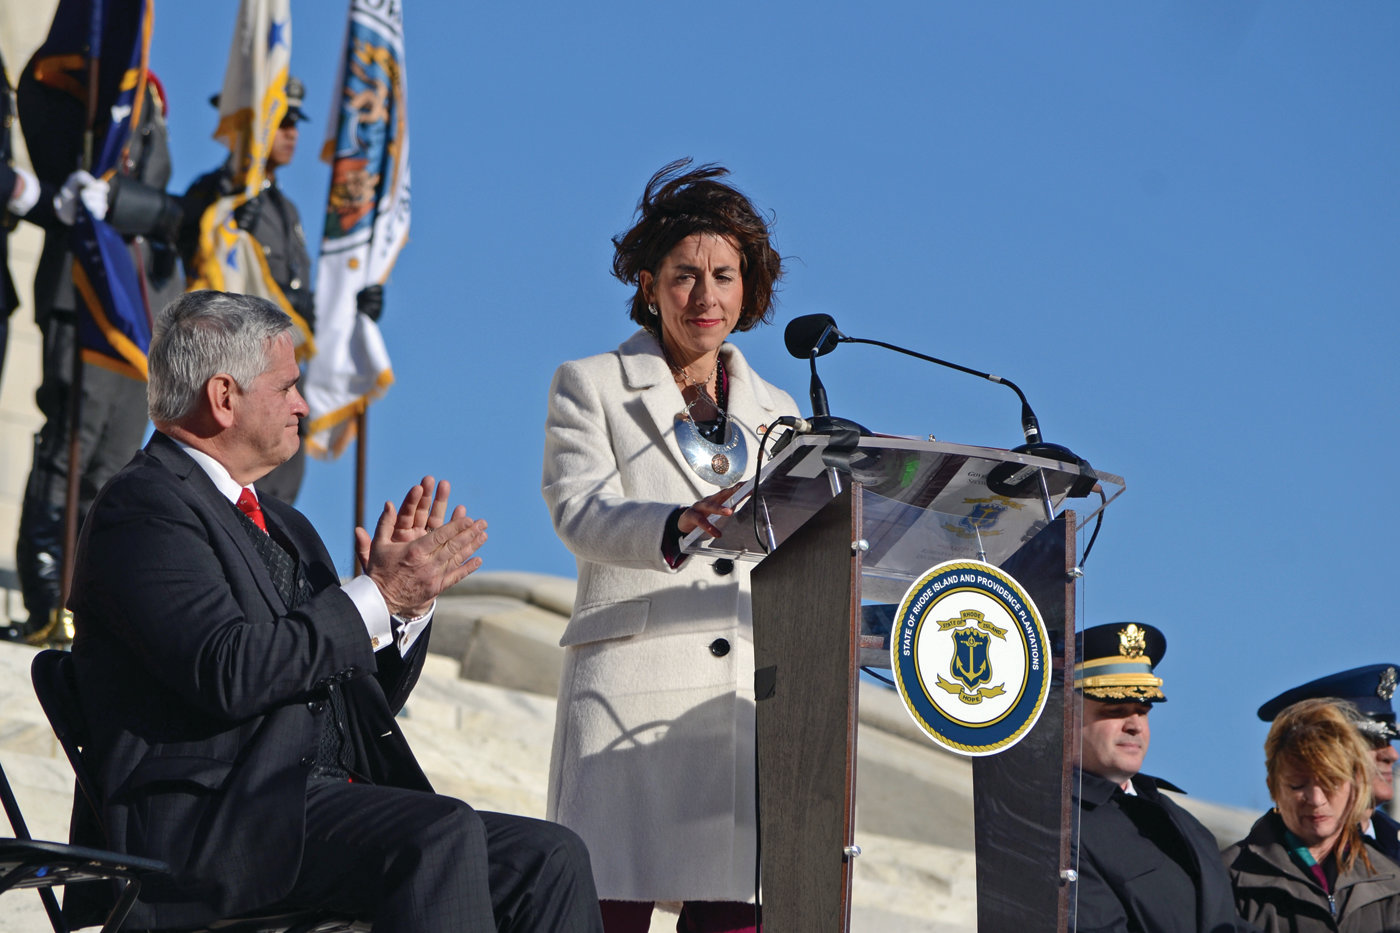 HOPE FOR THE FUTURE: Governor Gina Raimondo addresses the crowd as the strong winds gusted through Providence on Tuesday afternoon.